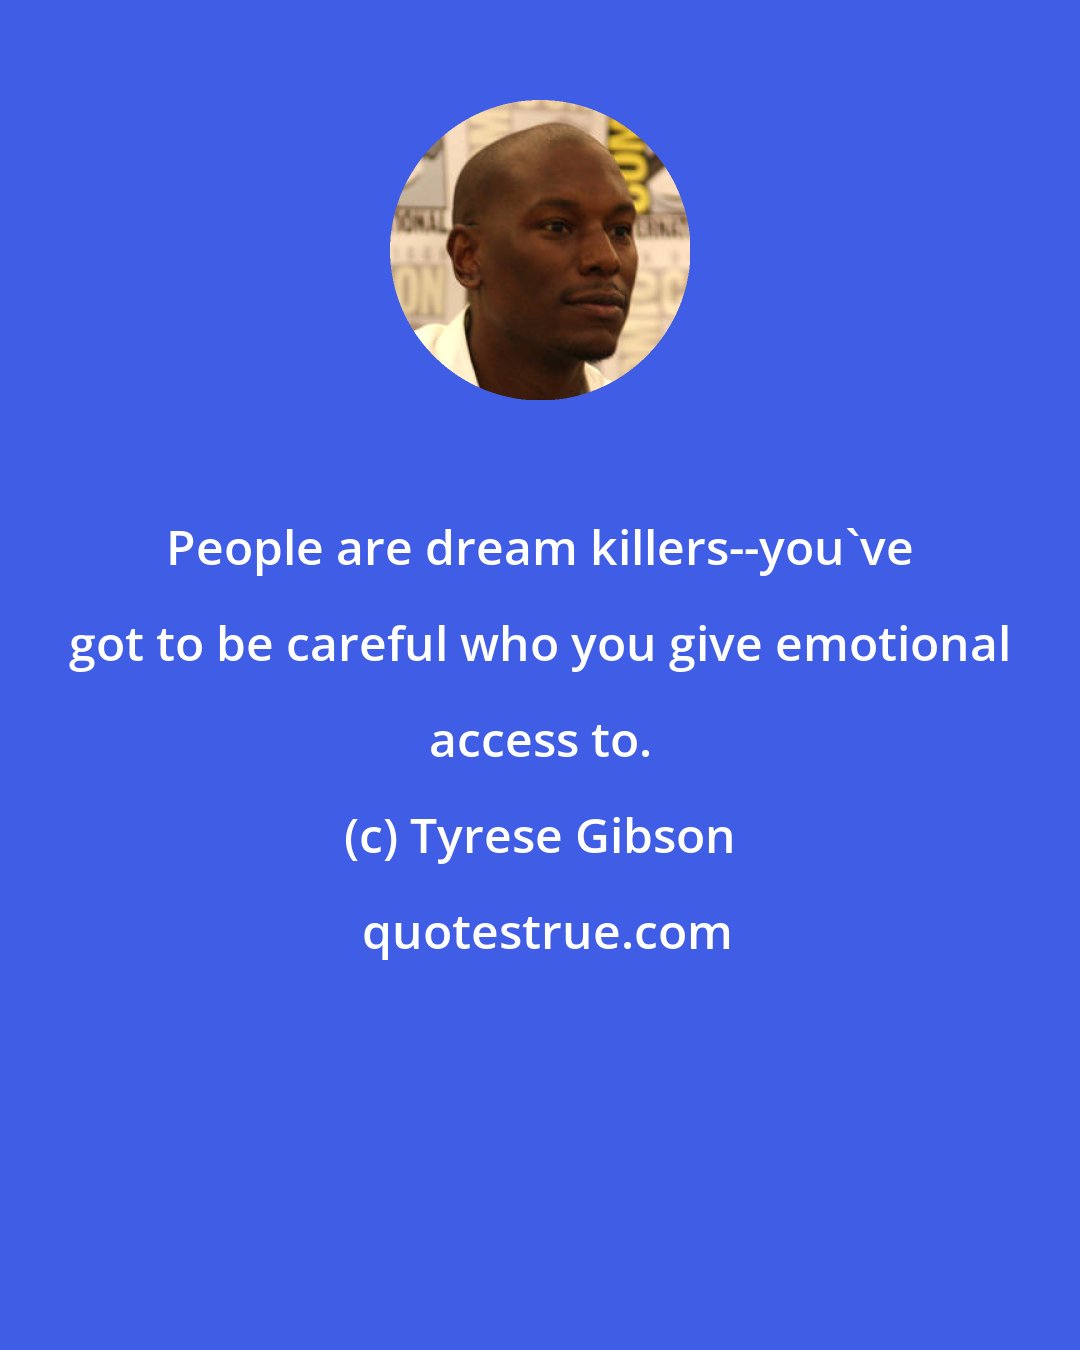 Tyrese Gibson: People are dream killers--you've got to be careful who you give emotional access to.